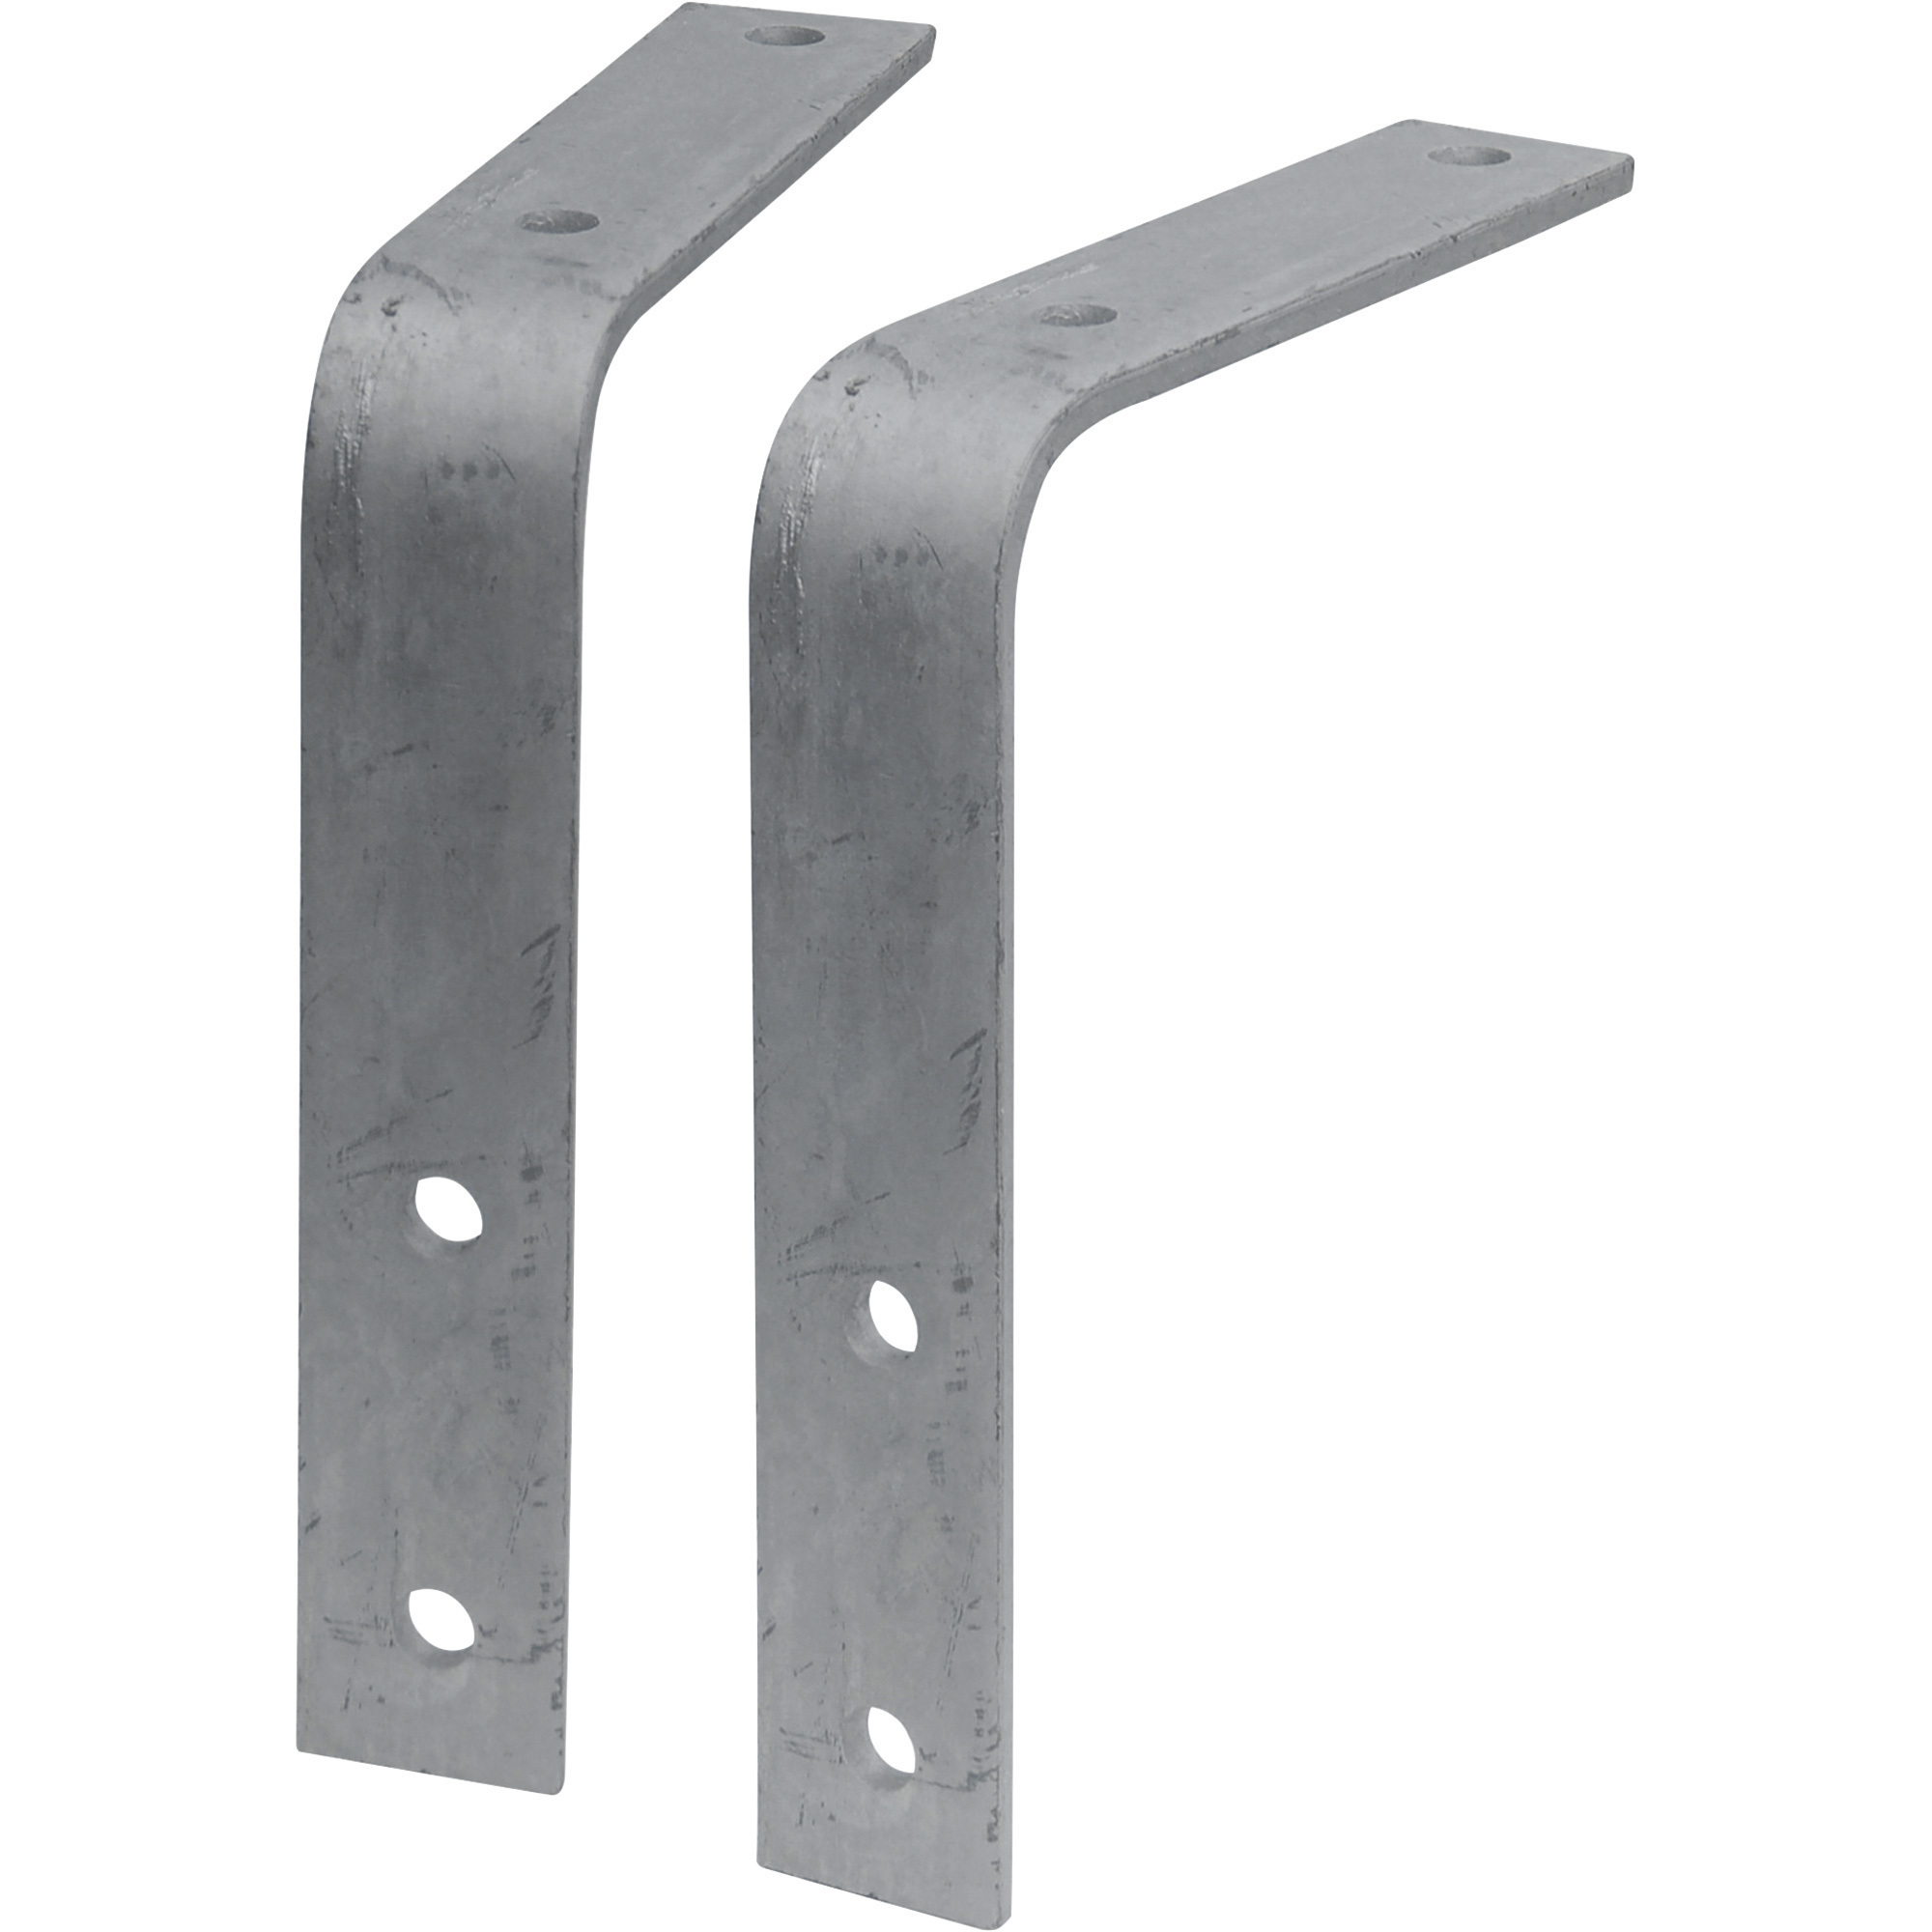 Tow Zone Trailer Fender Mounting Brackets, 2-Pack, Fits 8Inchâ10Inch Wide Fender, 13Inchâ15Inch Tires, Model 44944